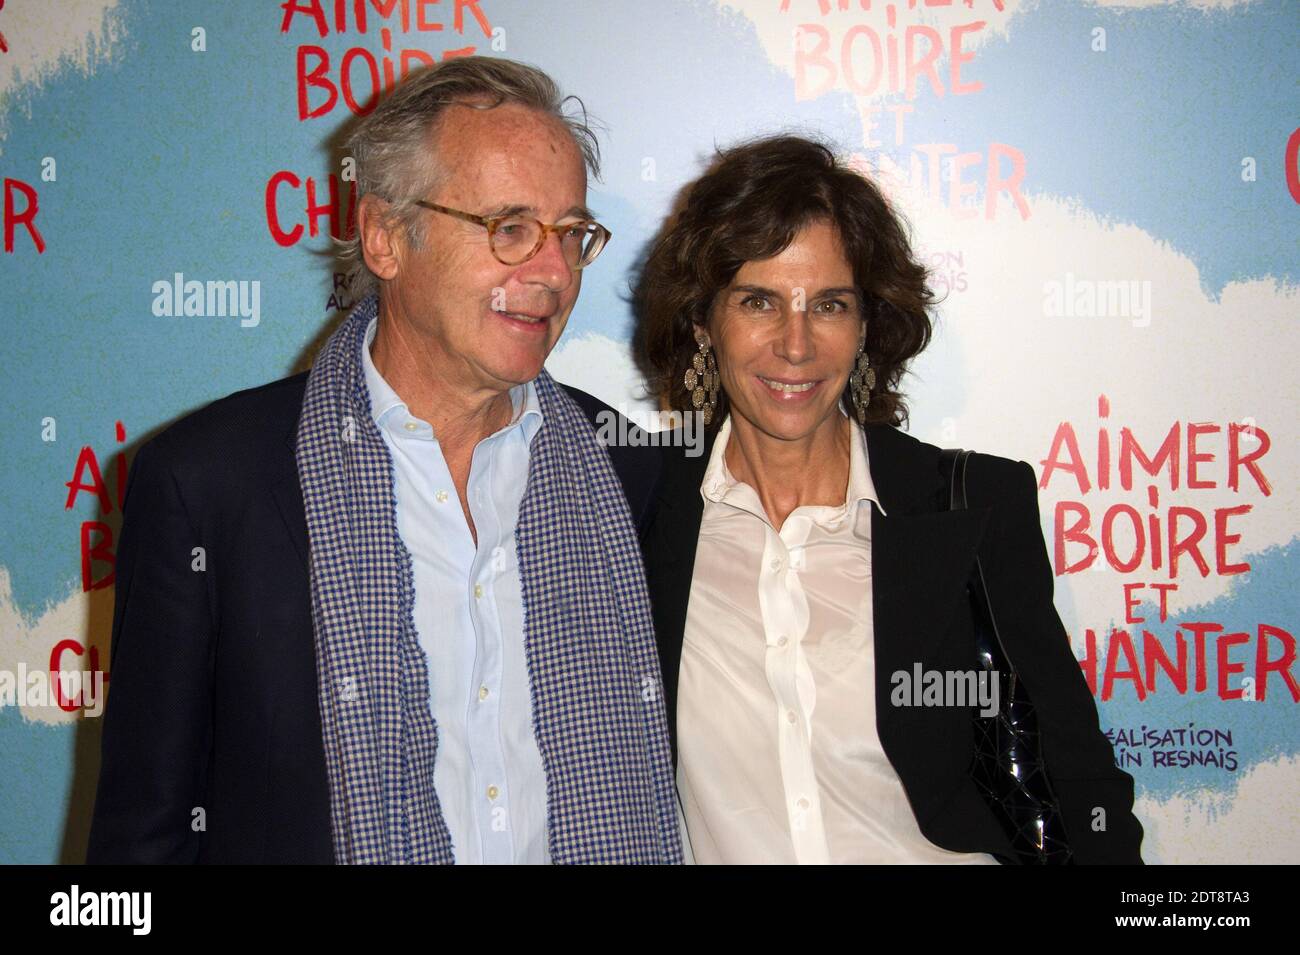 Olivier and Christine Orban attending the premiere of the film 'Aimer, boire et chanter' by the late French filmmaker Alain Resnais at UGC Normandy theatre, in Paris, France on March 10, 2014. Photo by Christophe Guibbaud/ABACAPRESS.COM Stock Photo